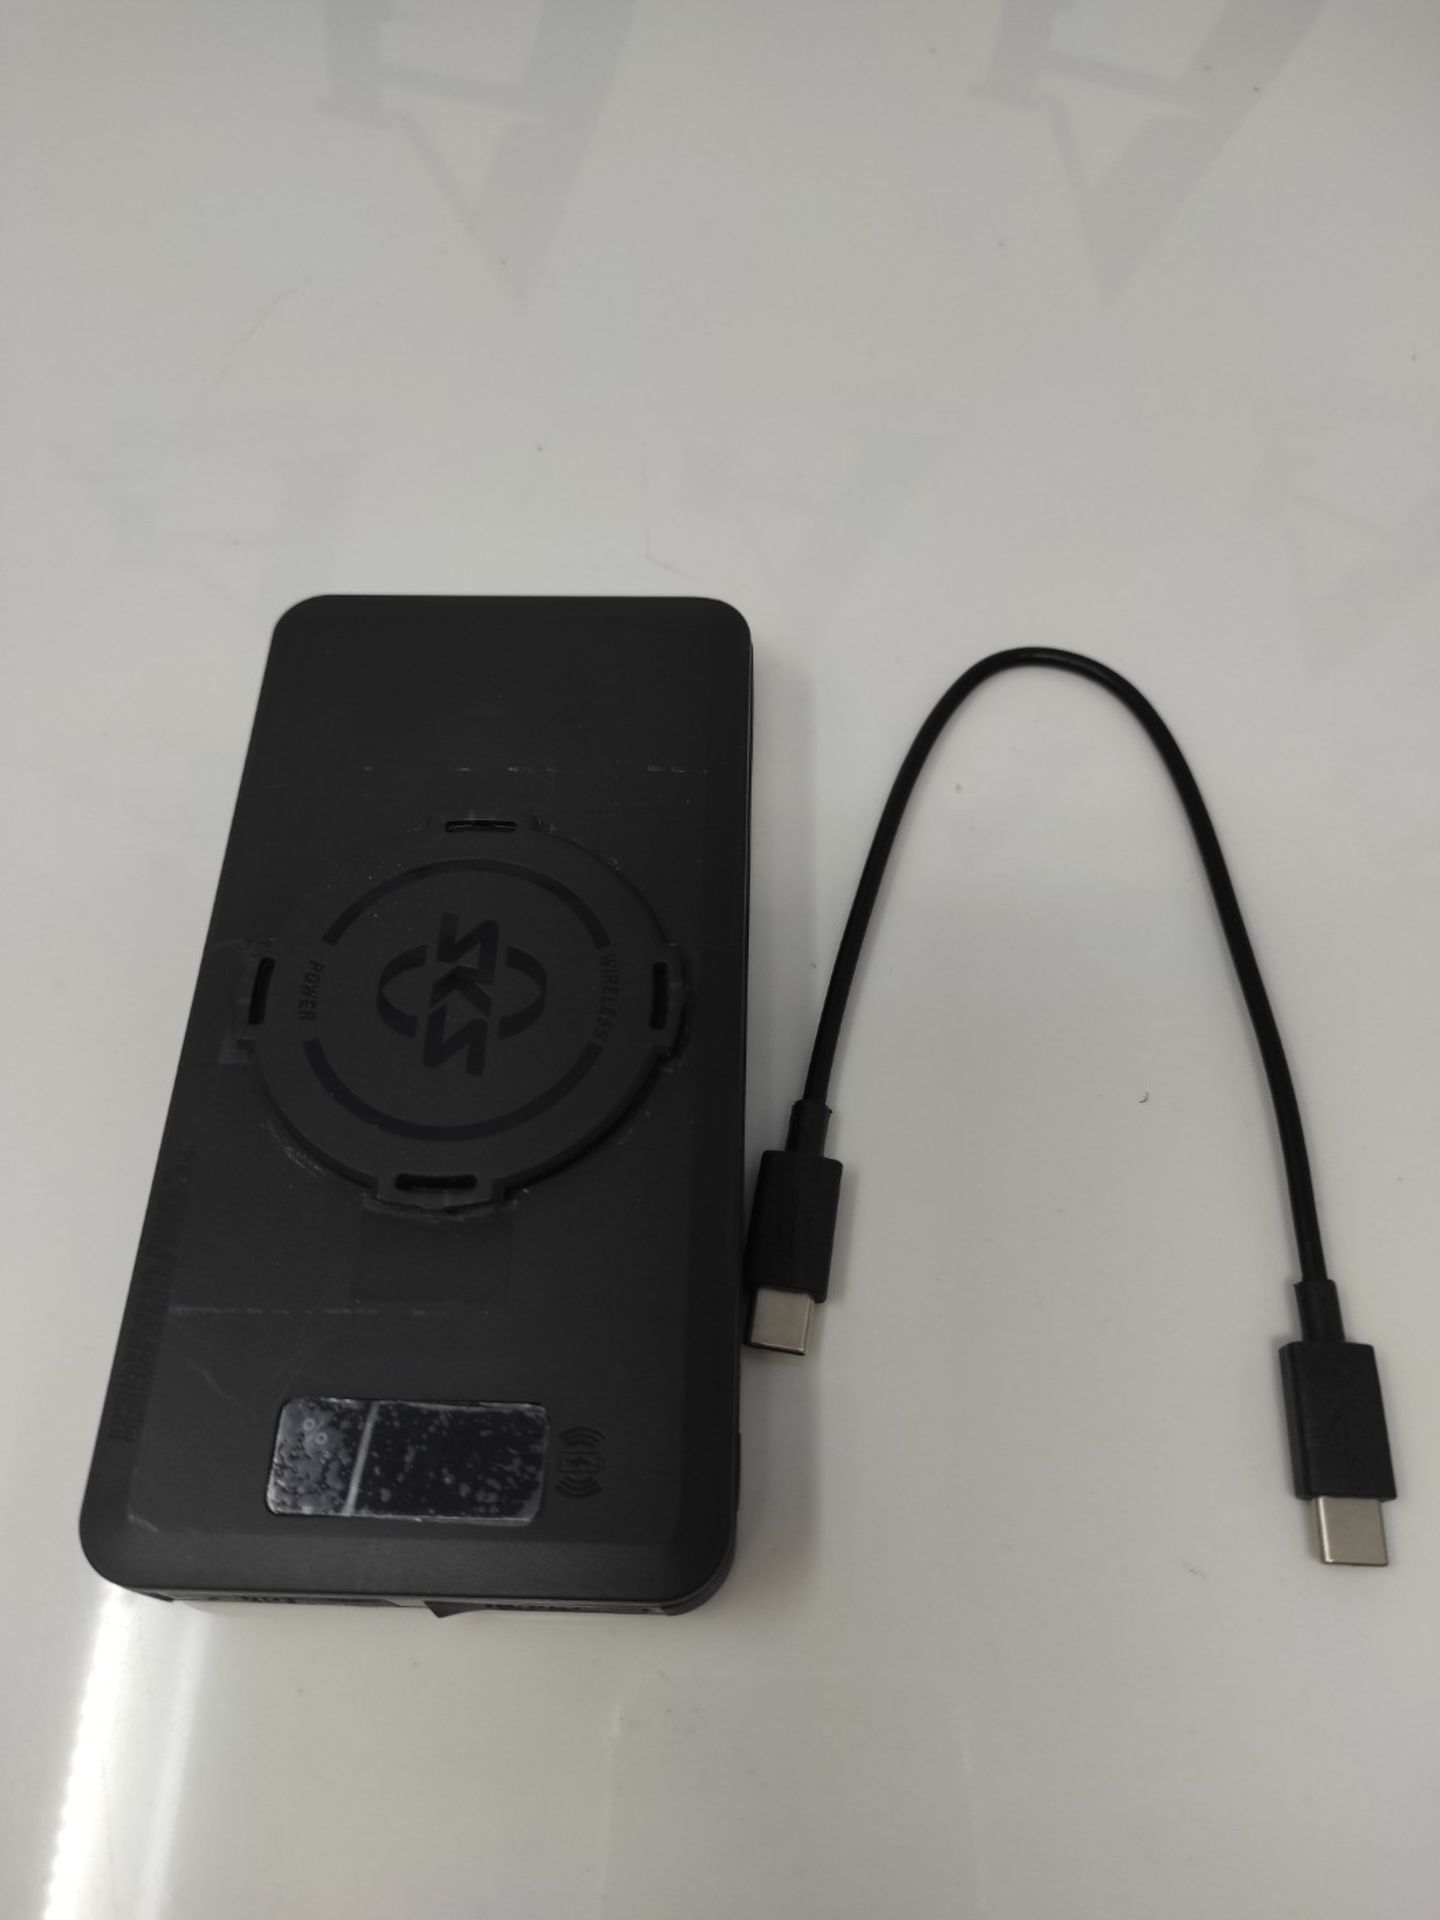 SKS GERMANY +COM/Charger 10,000 mAh Powerbank with inductive charging function for mou - Image 3 of 3